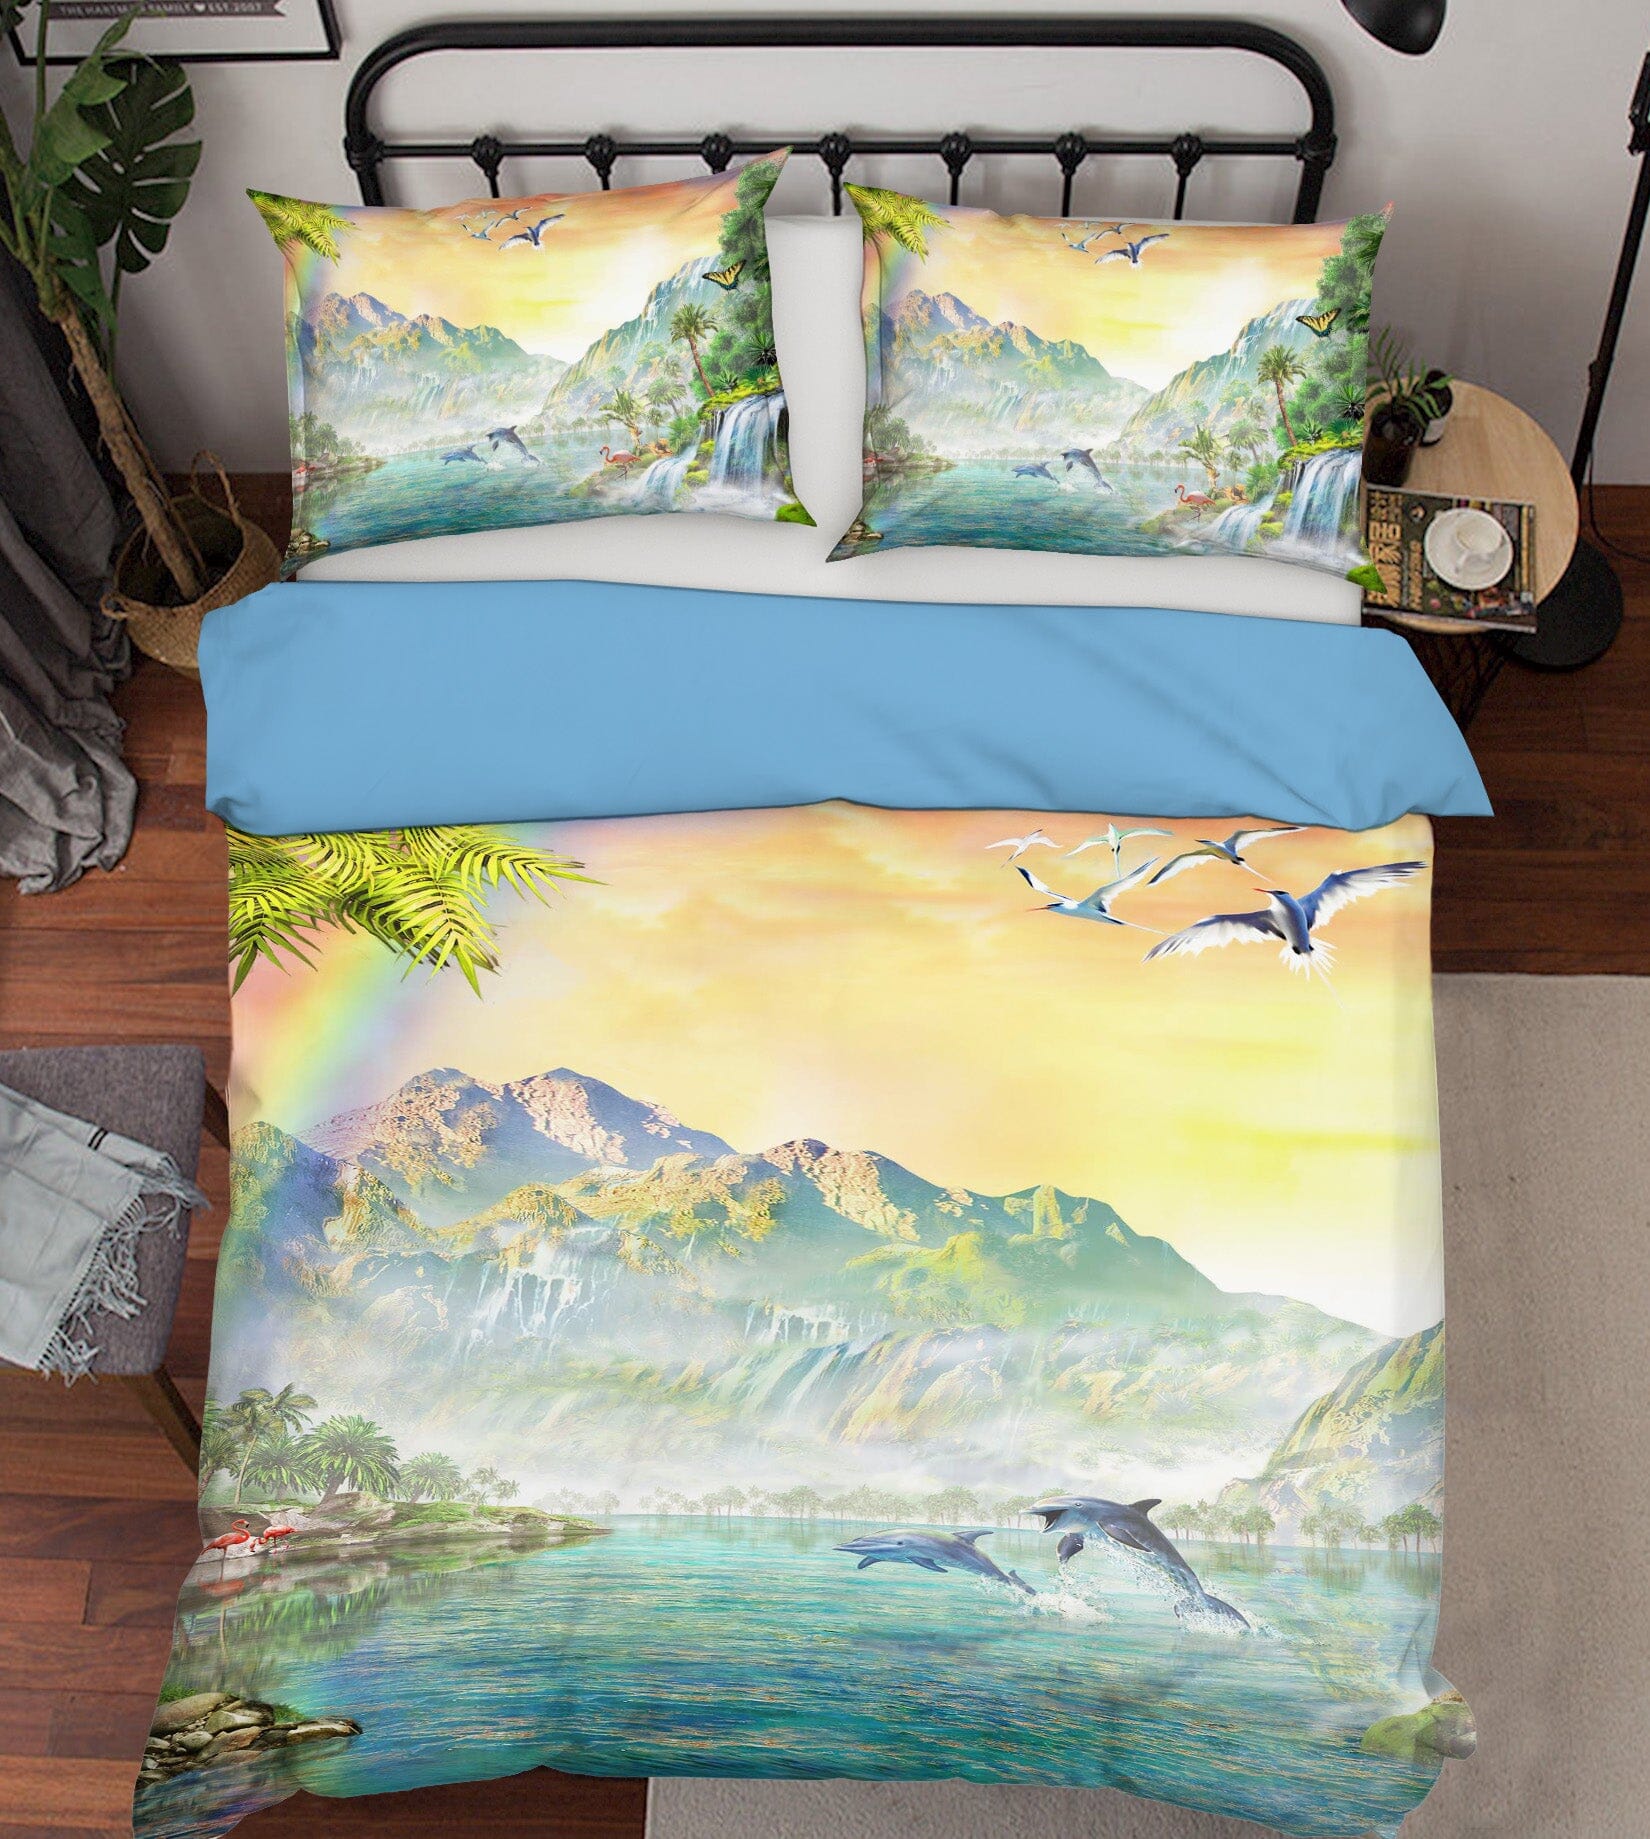 3D Canyon Rainbow 2118 Adrian Chesterman Bedding Bed Pillowcases Quilt Quiet Covers AJ Creativity Home 